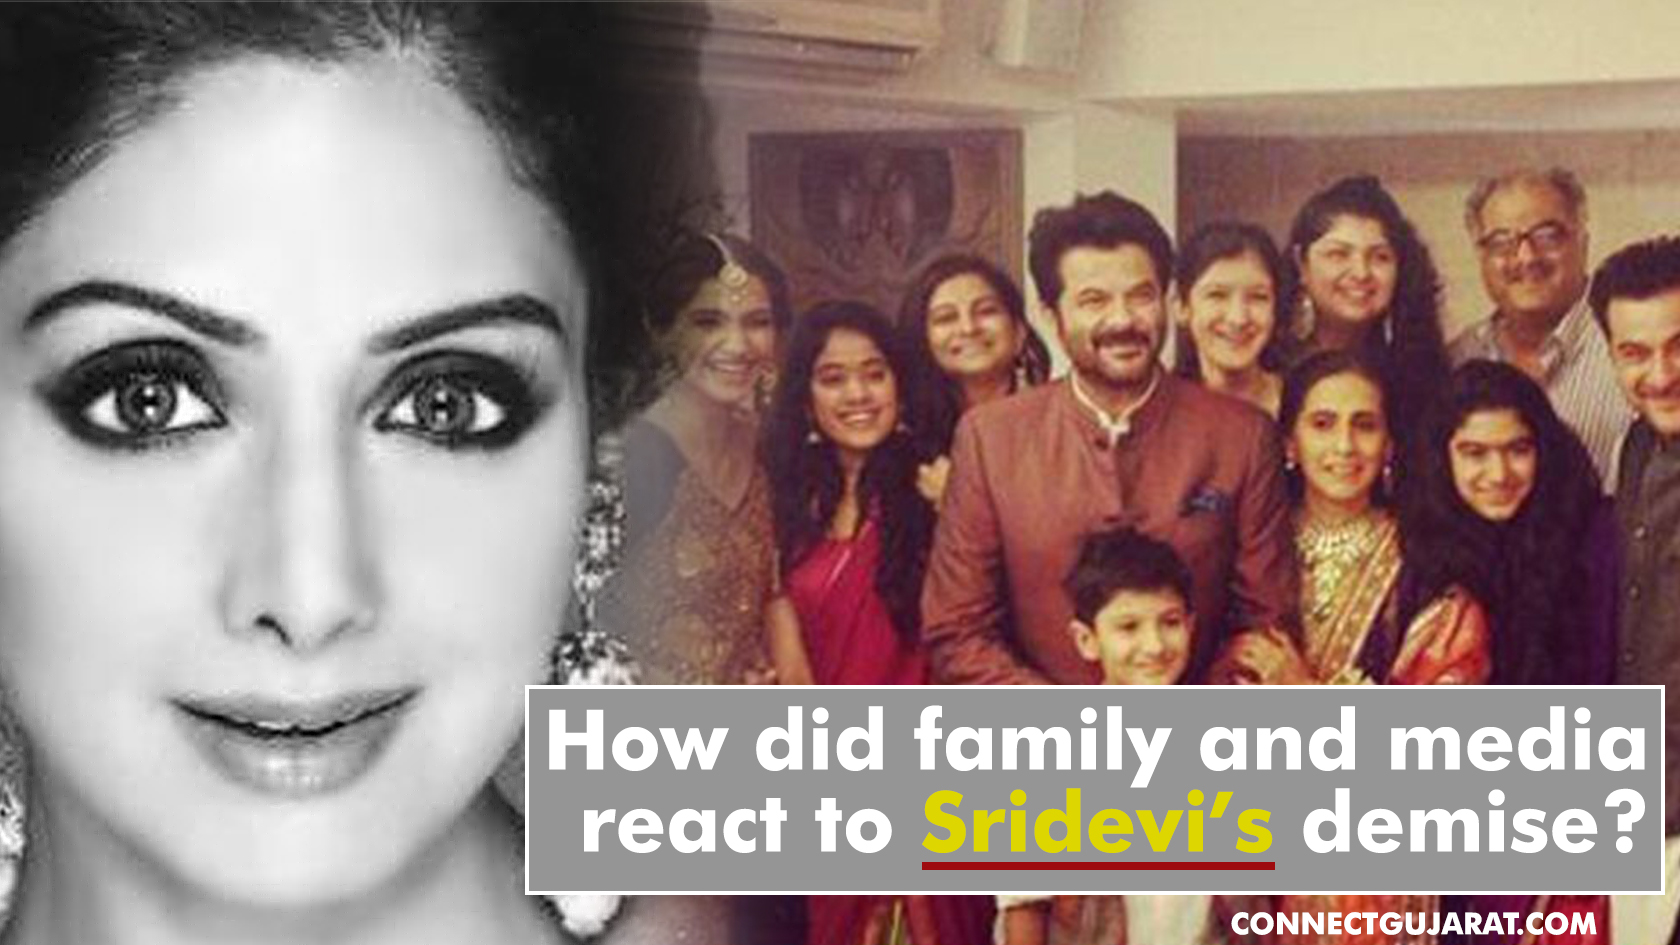 How did family and media react to Sridevi’s demise?